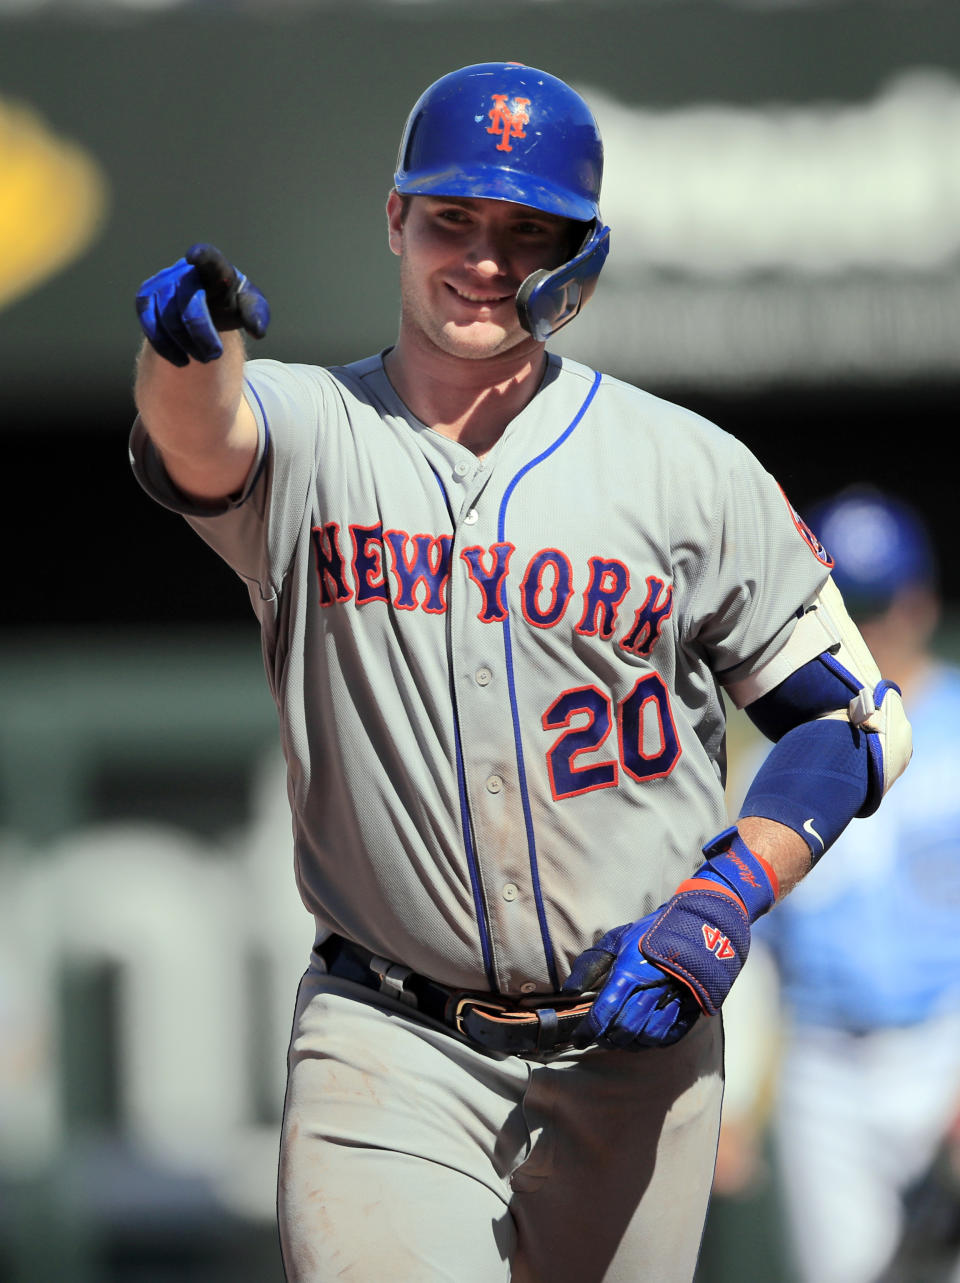 New York Mets' Pete Alonso points to fans after hitting his 40th home run of the season during the ninth inning of a baseball game against the Kansas City Royals at Kauffman Stadium in Kansas City, Mo., Sunday, Aug. 18, 2019. The Mets defeated the Royals 11-5. (AP Photo/Orlin Wagner)